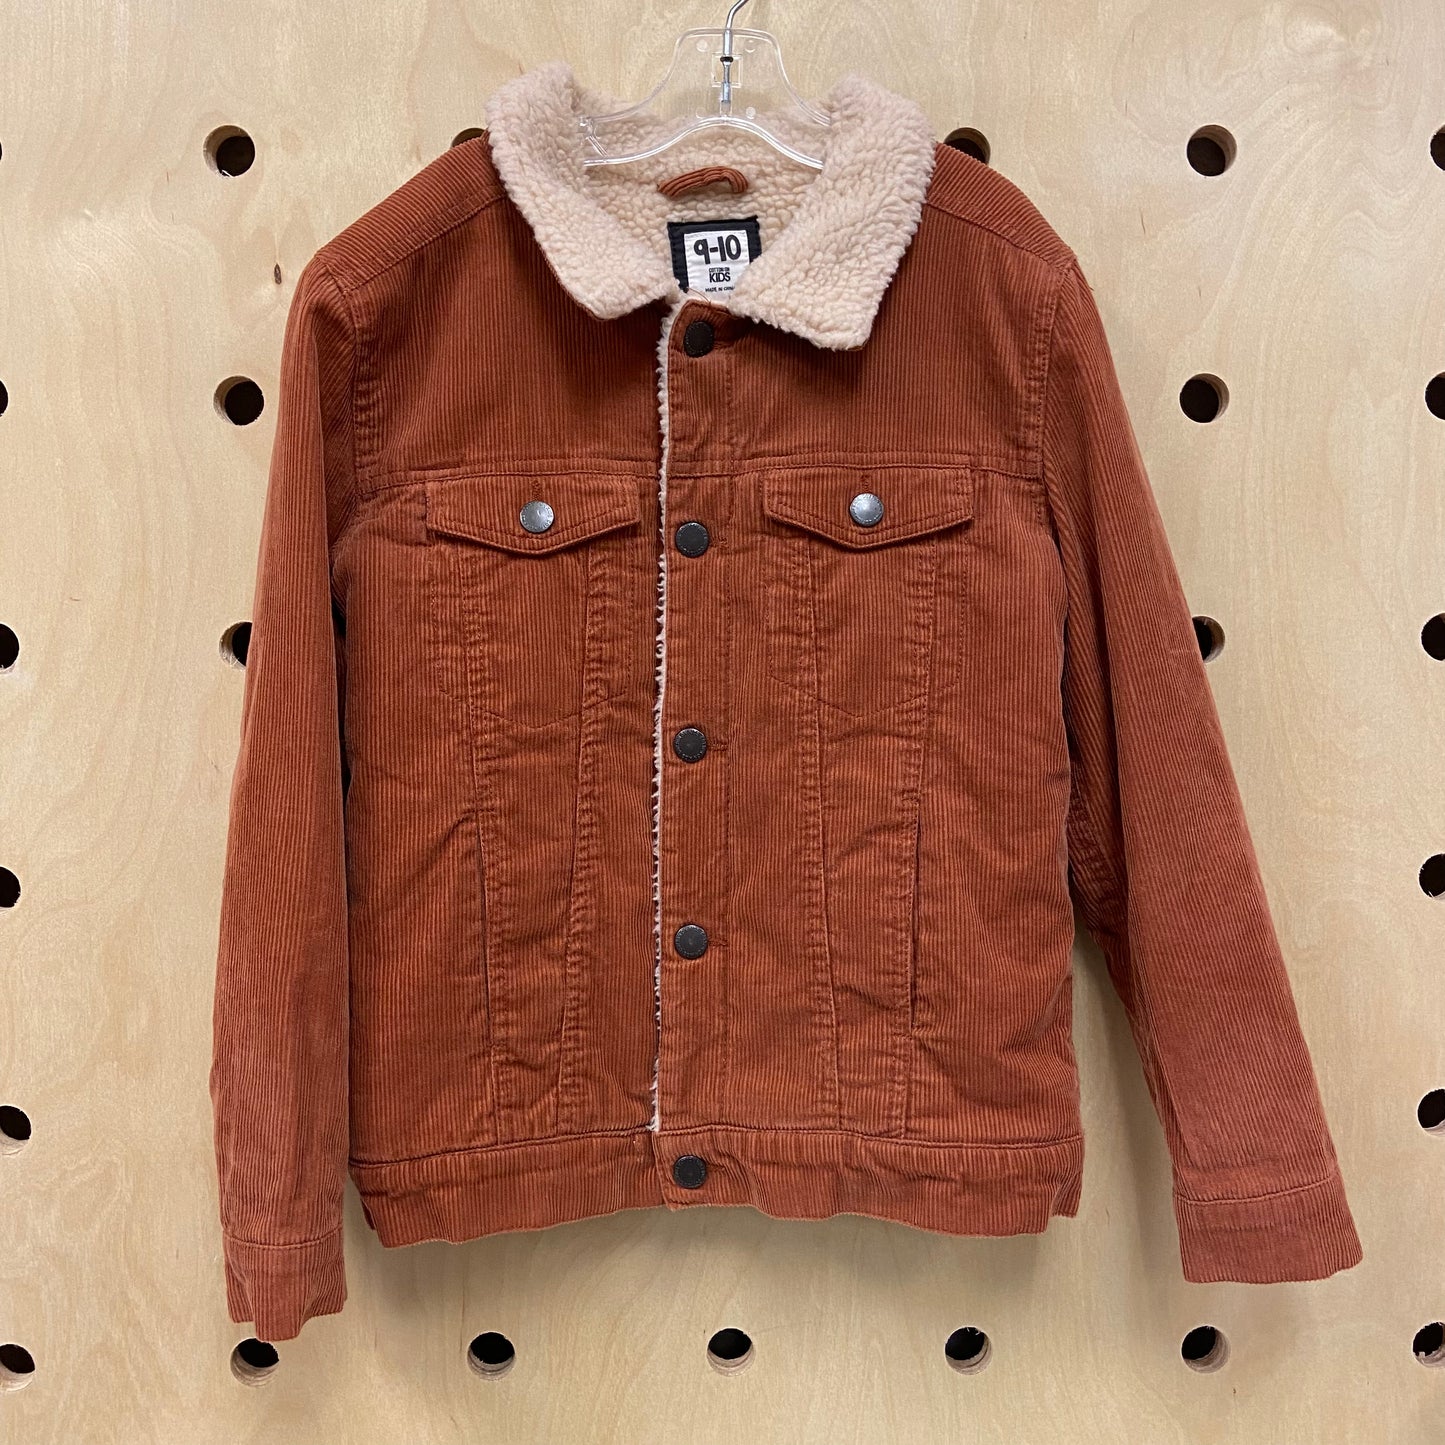 Rust Cord Sherpa Lined Jacket